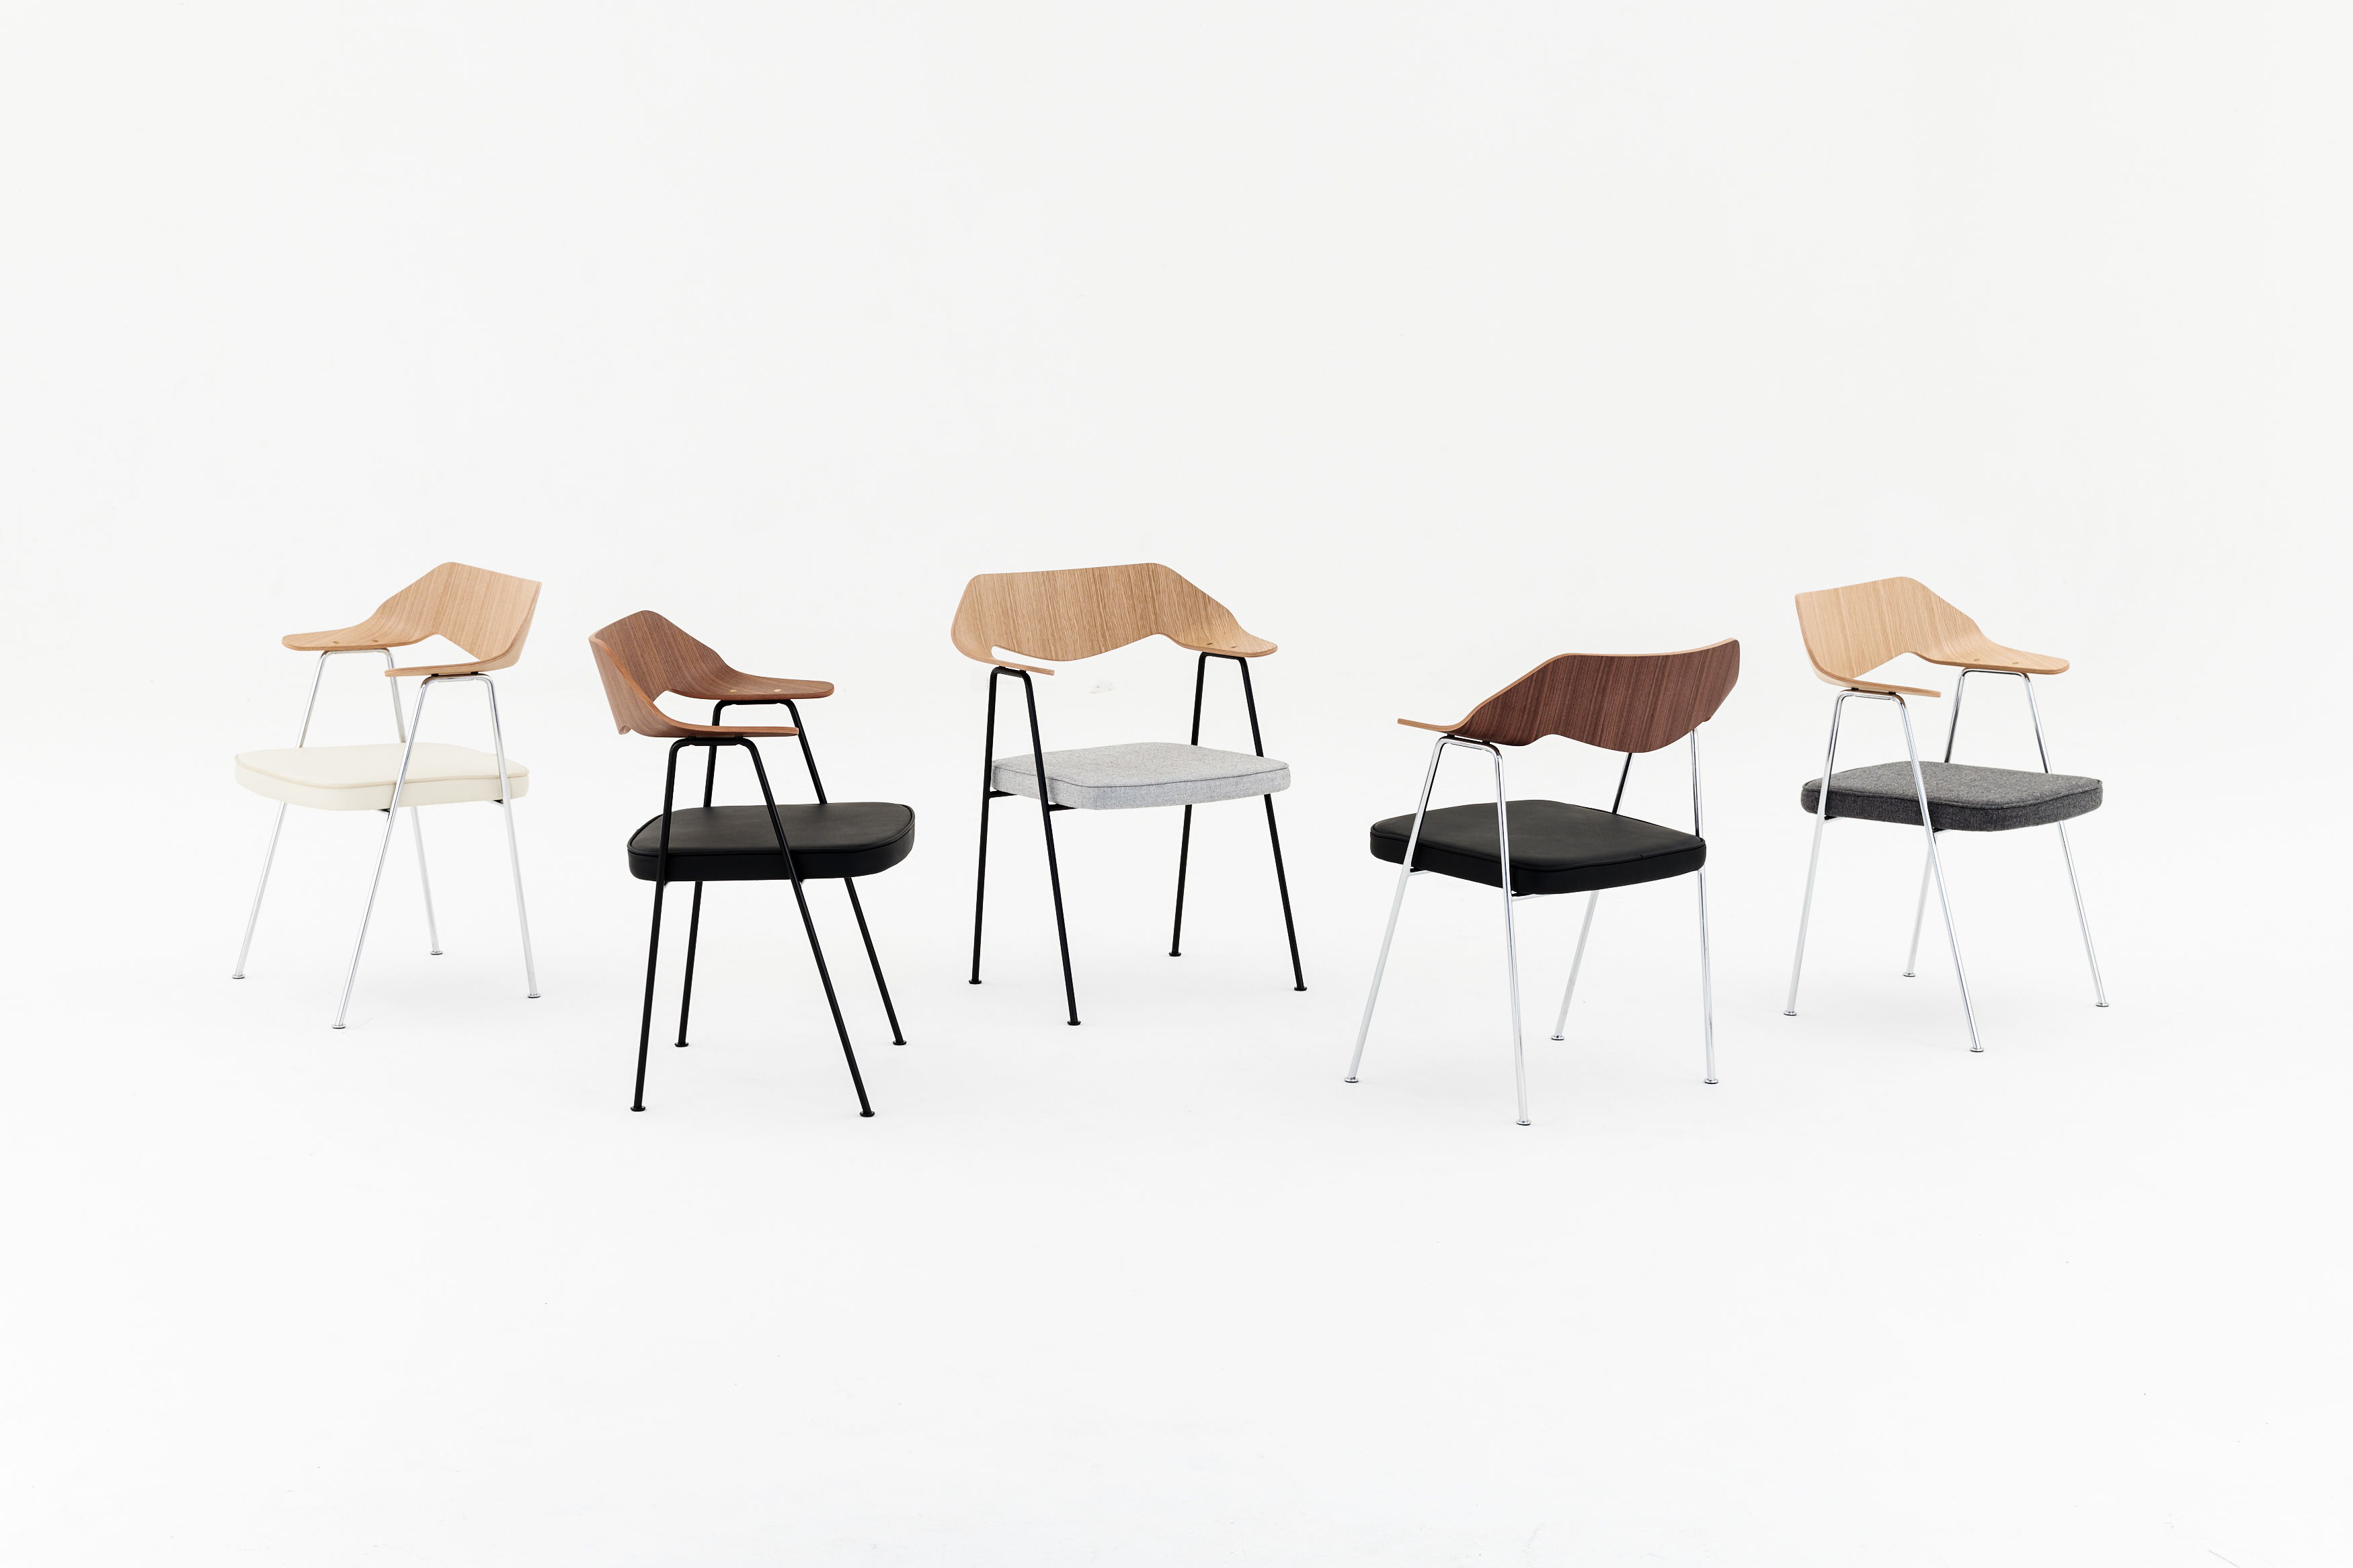 675 Robin Day Chair by Case Furniture, which celebrates its 70th birthday at CDW 2022